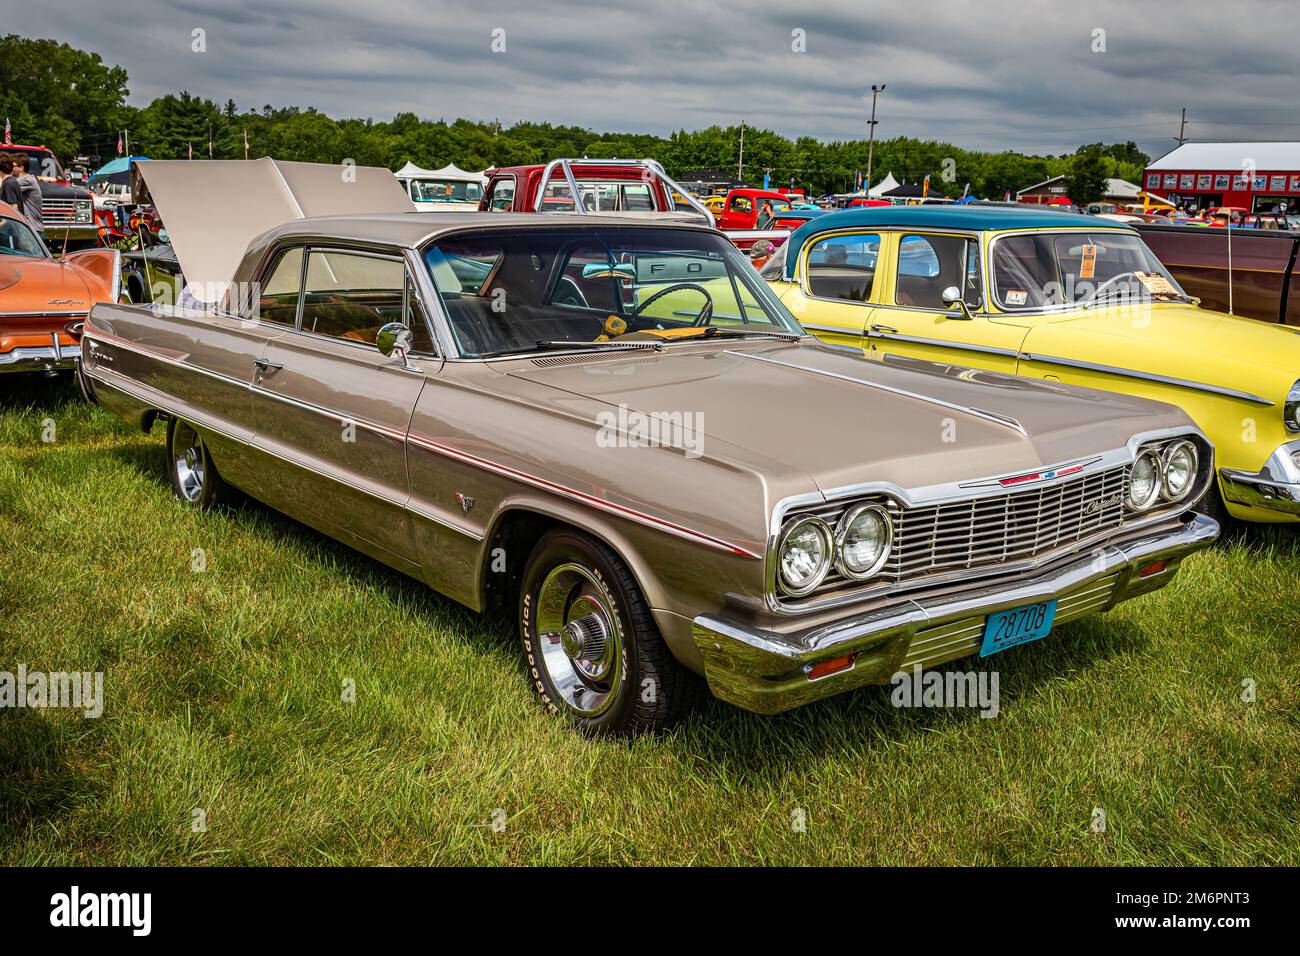 Iola, WI - July 07, 2022: High perspective front corner view of a 1964 Chevrolet Impala 2 Door Hardtop at a local car show. Stock Photo